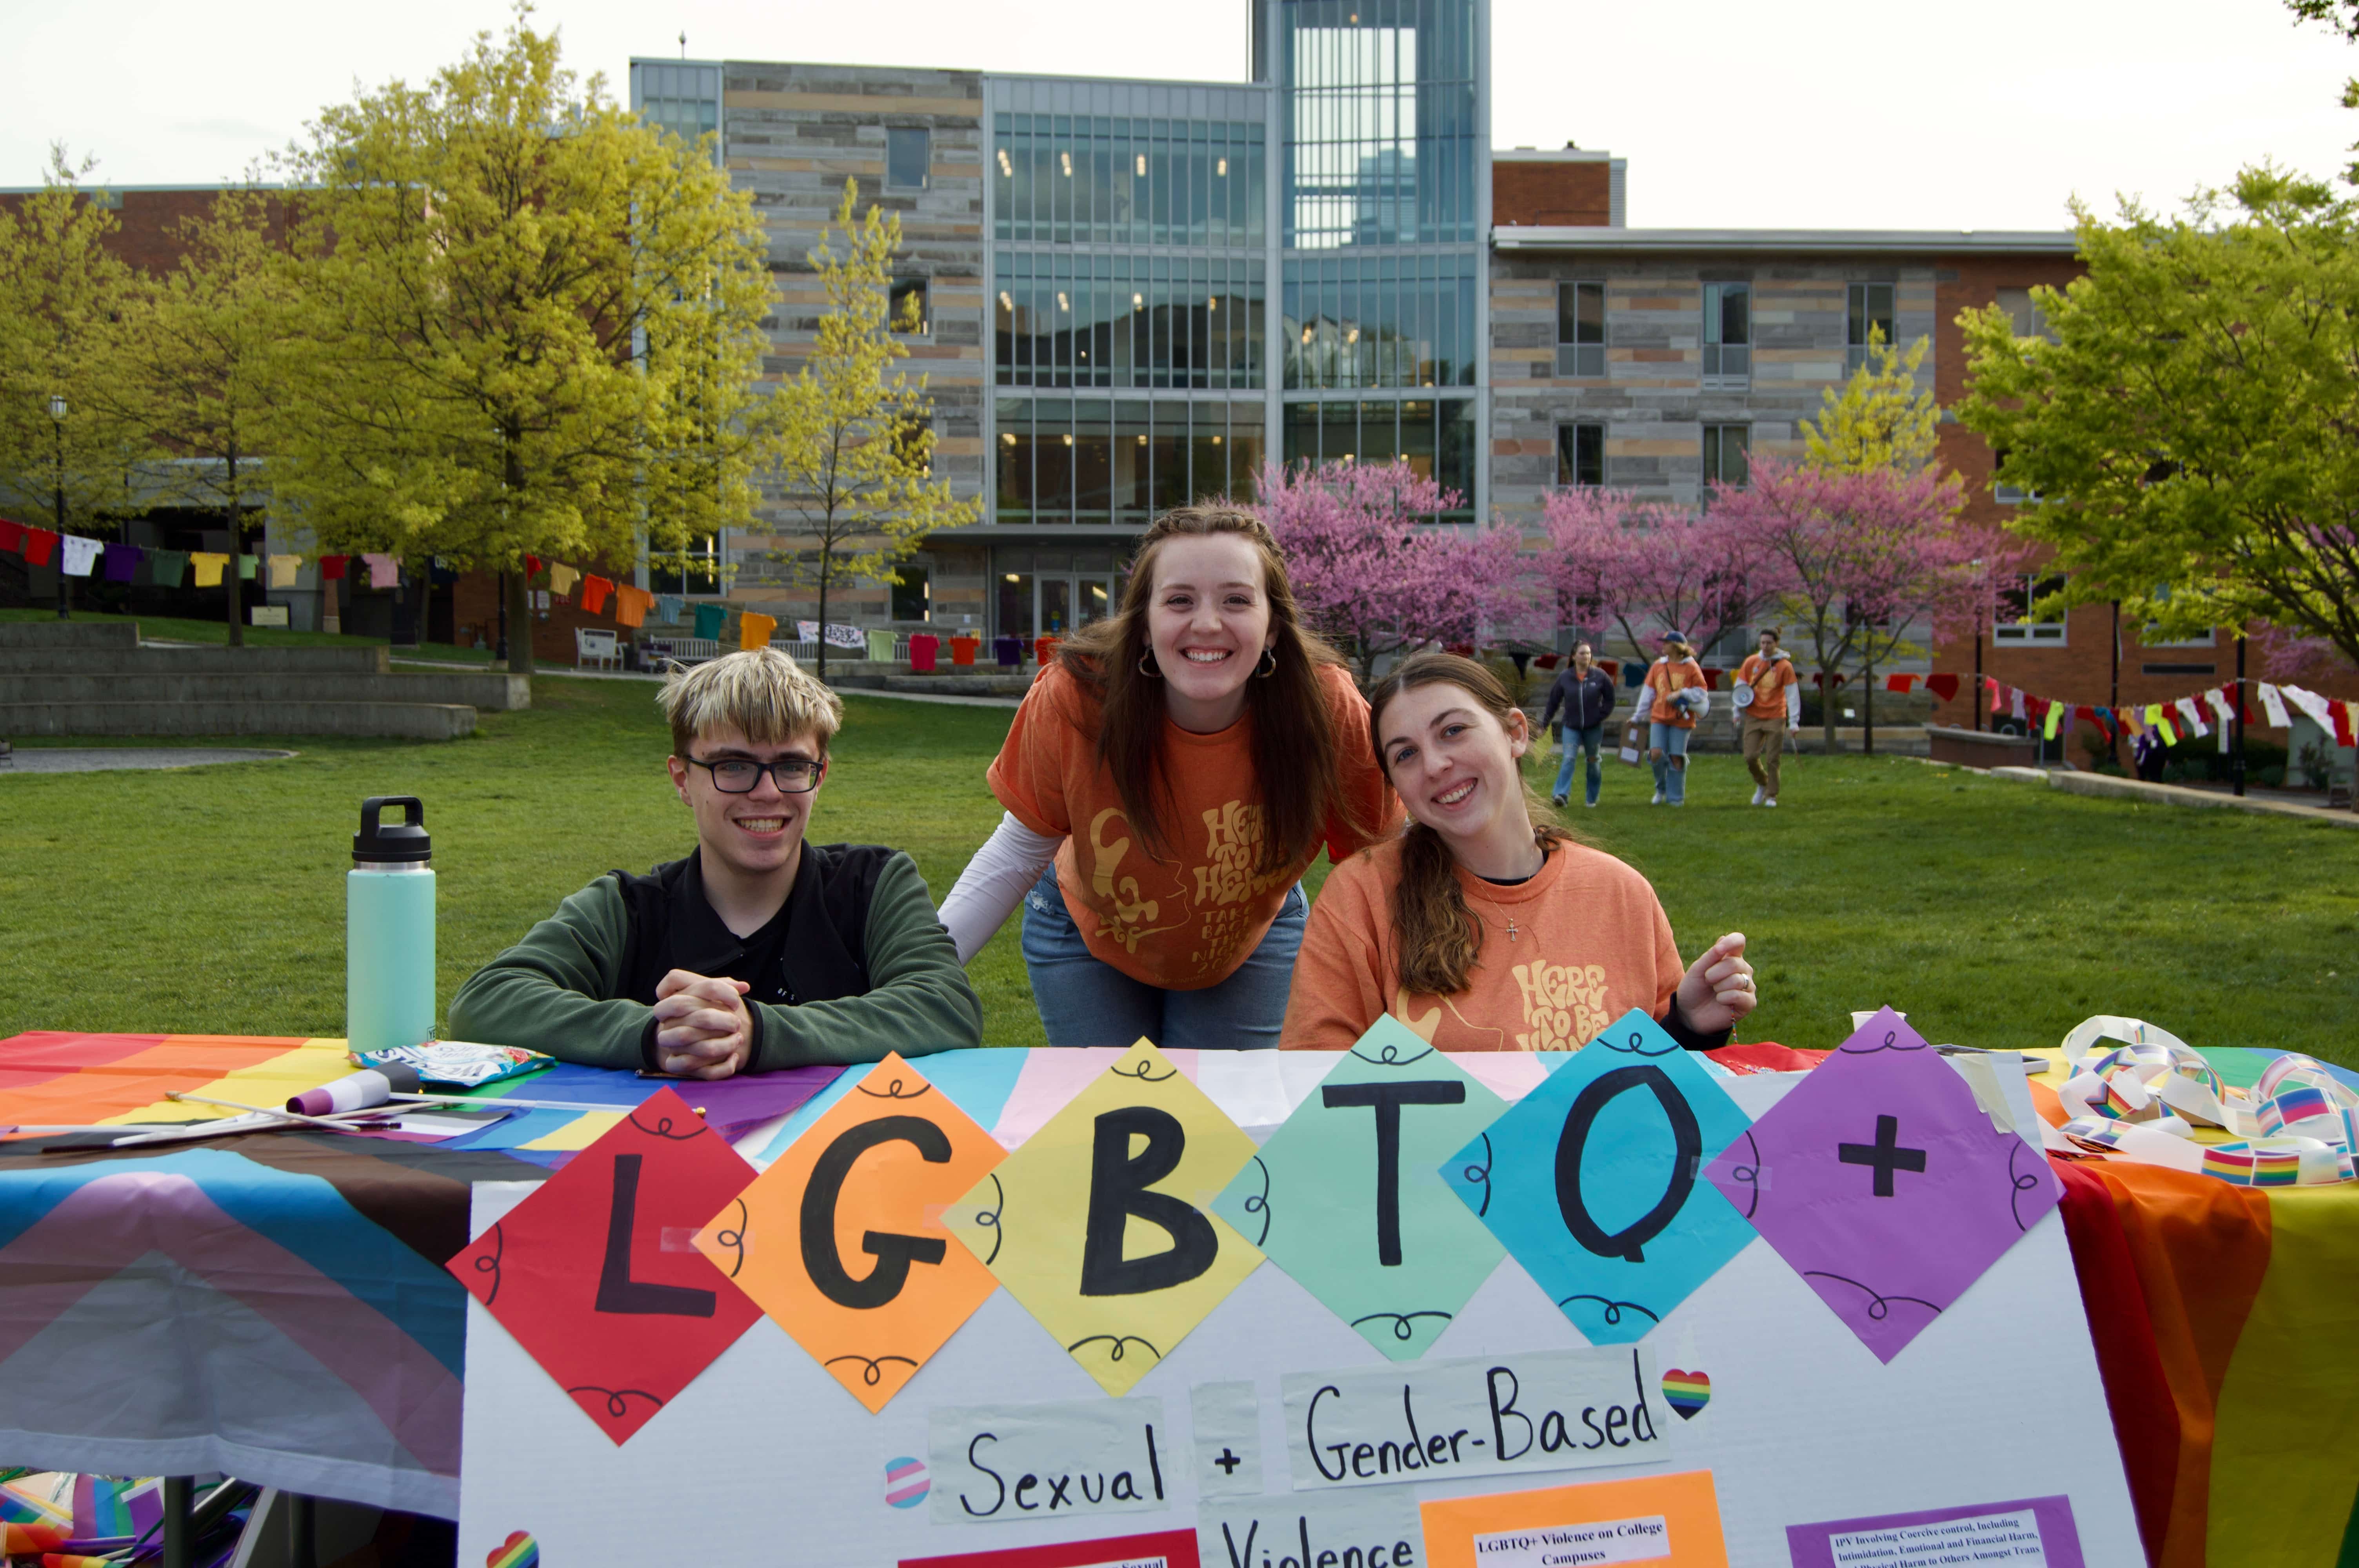 three people at a table on a lawn. In front of them a poster features the letter LGBTQ+